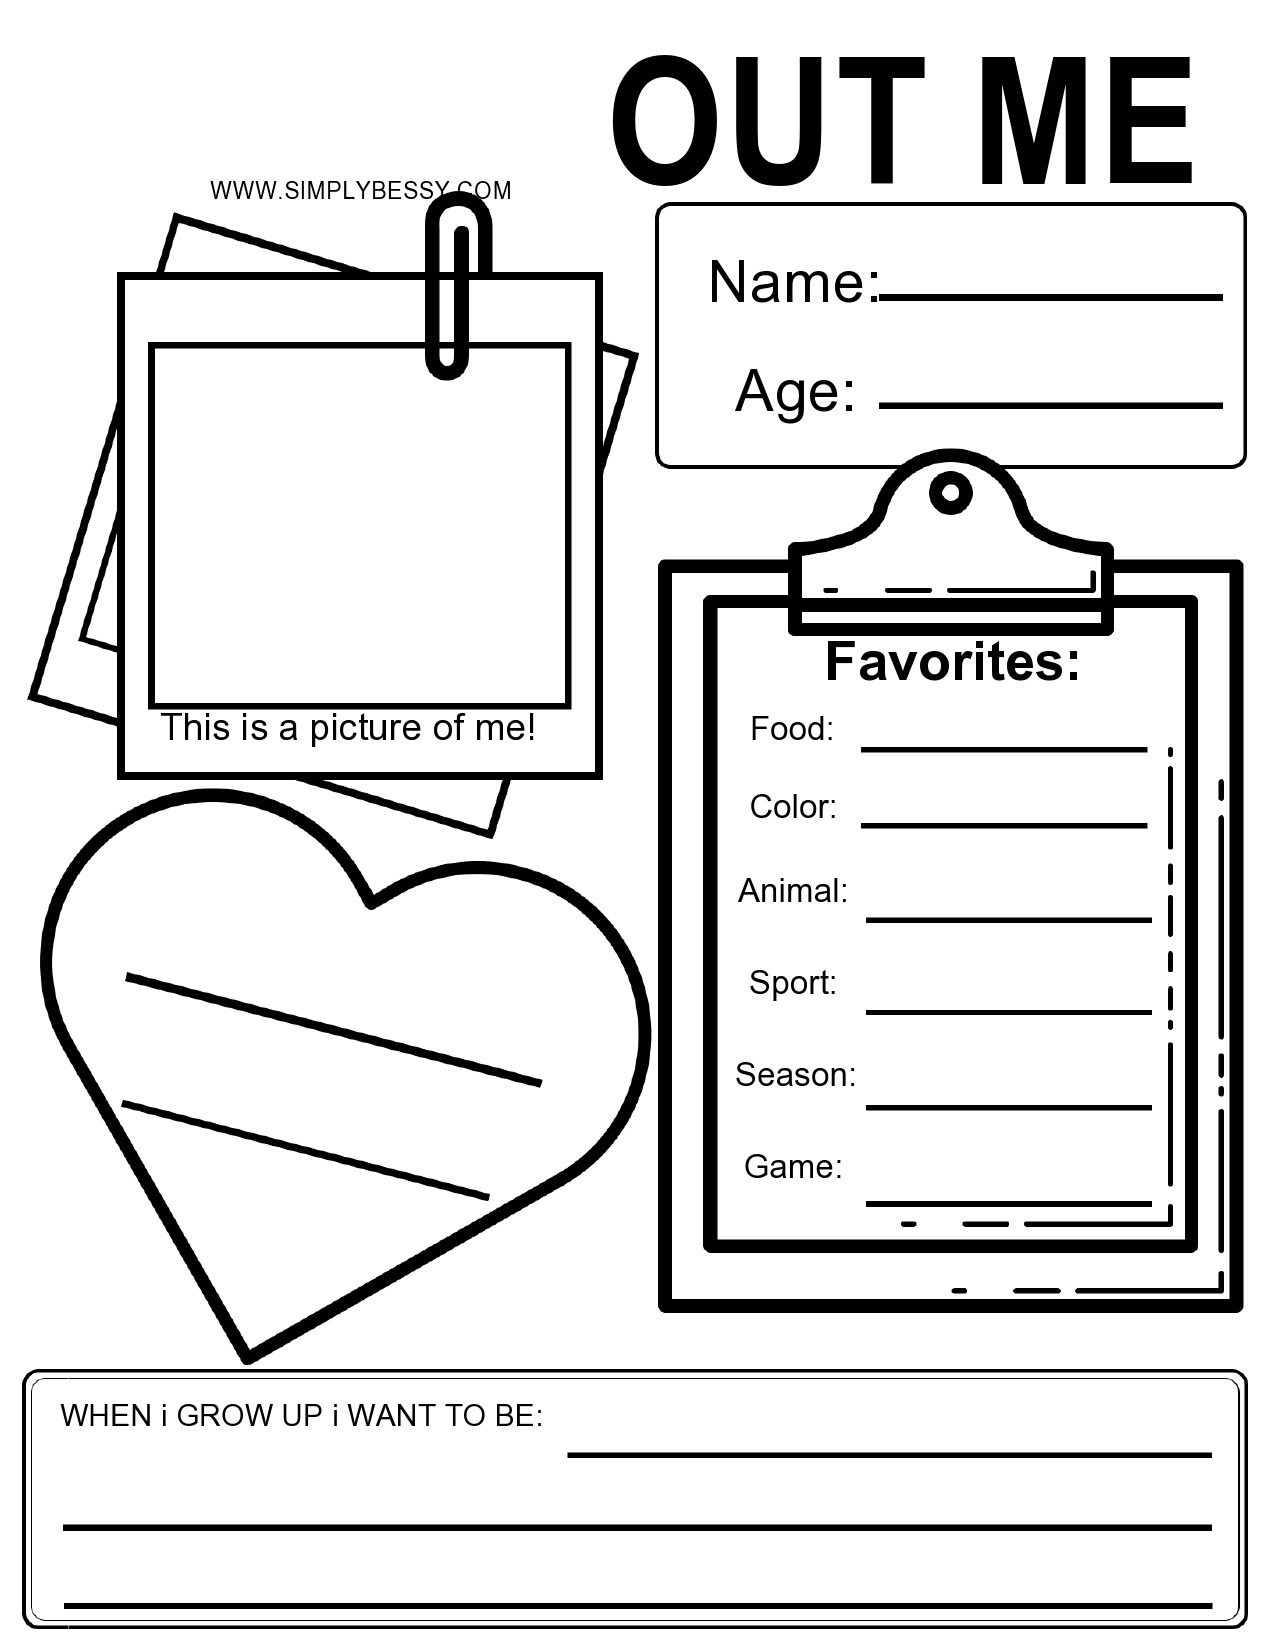 40 Printable All About Me Templates FREE TemplateLab